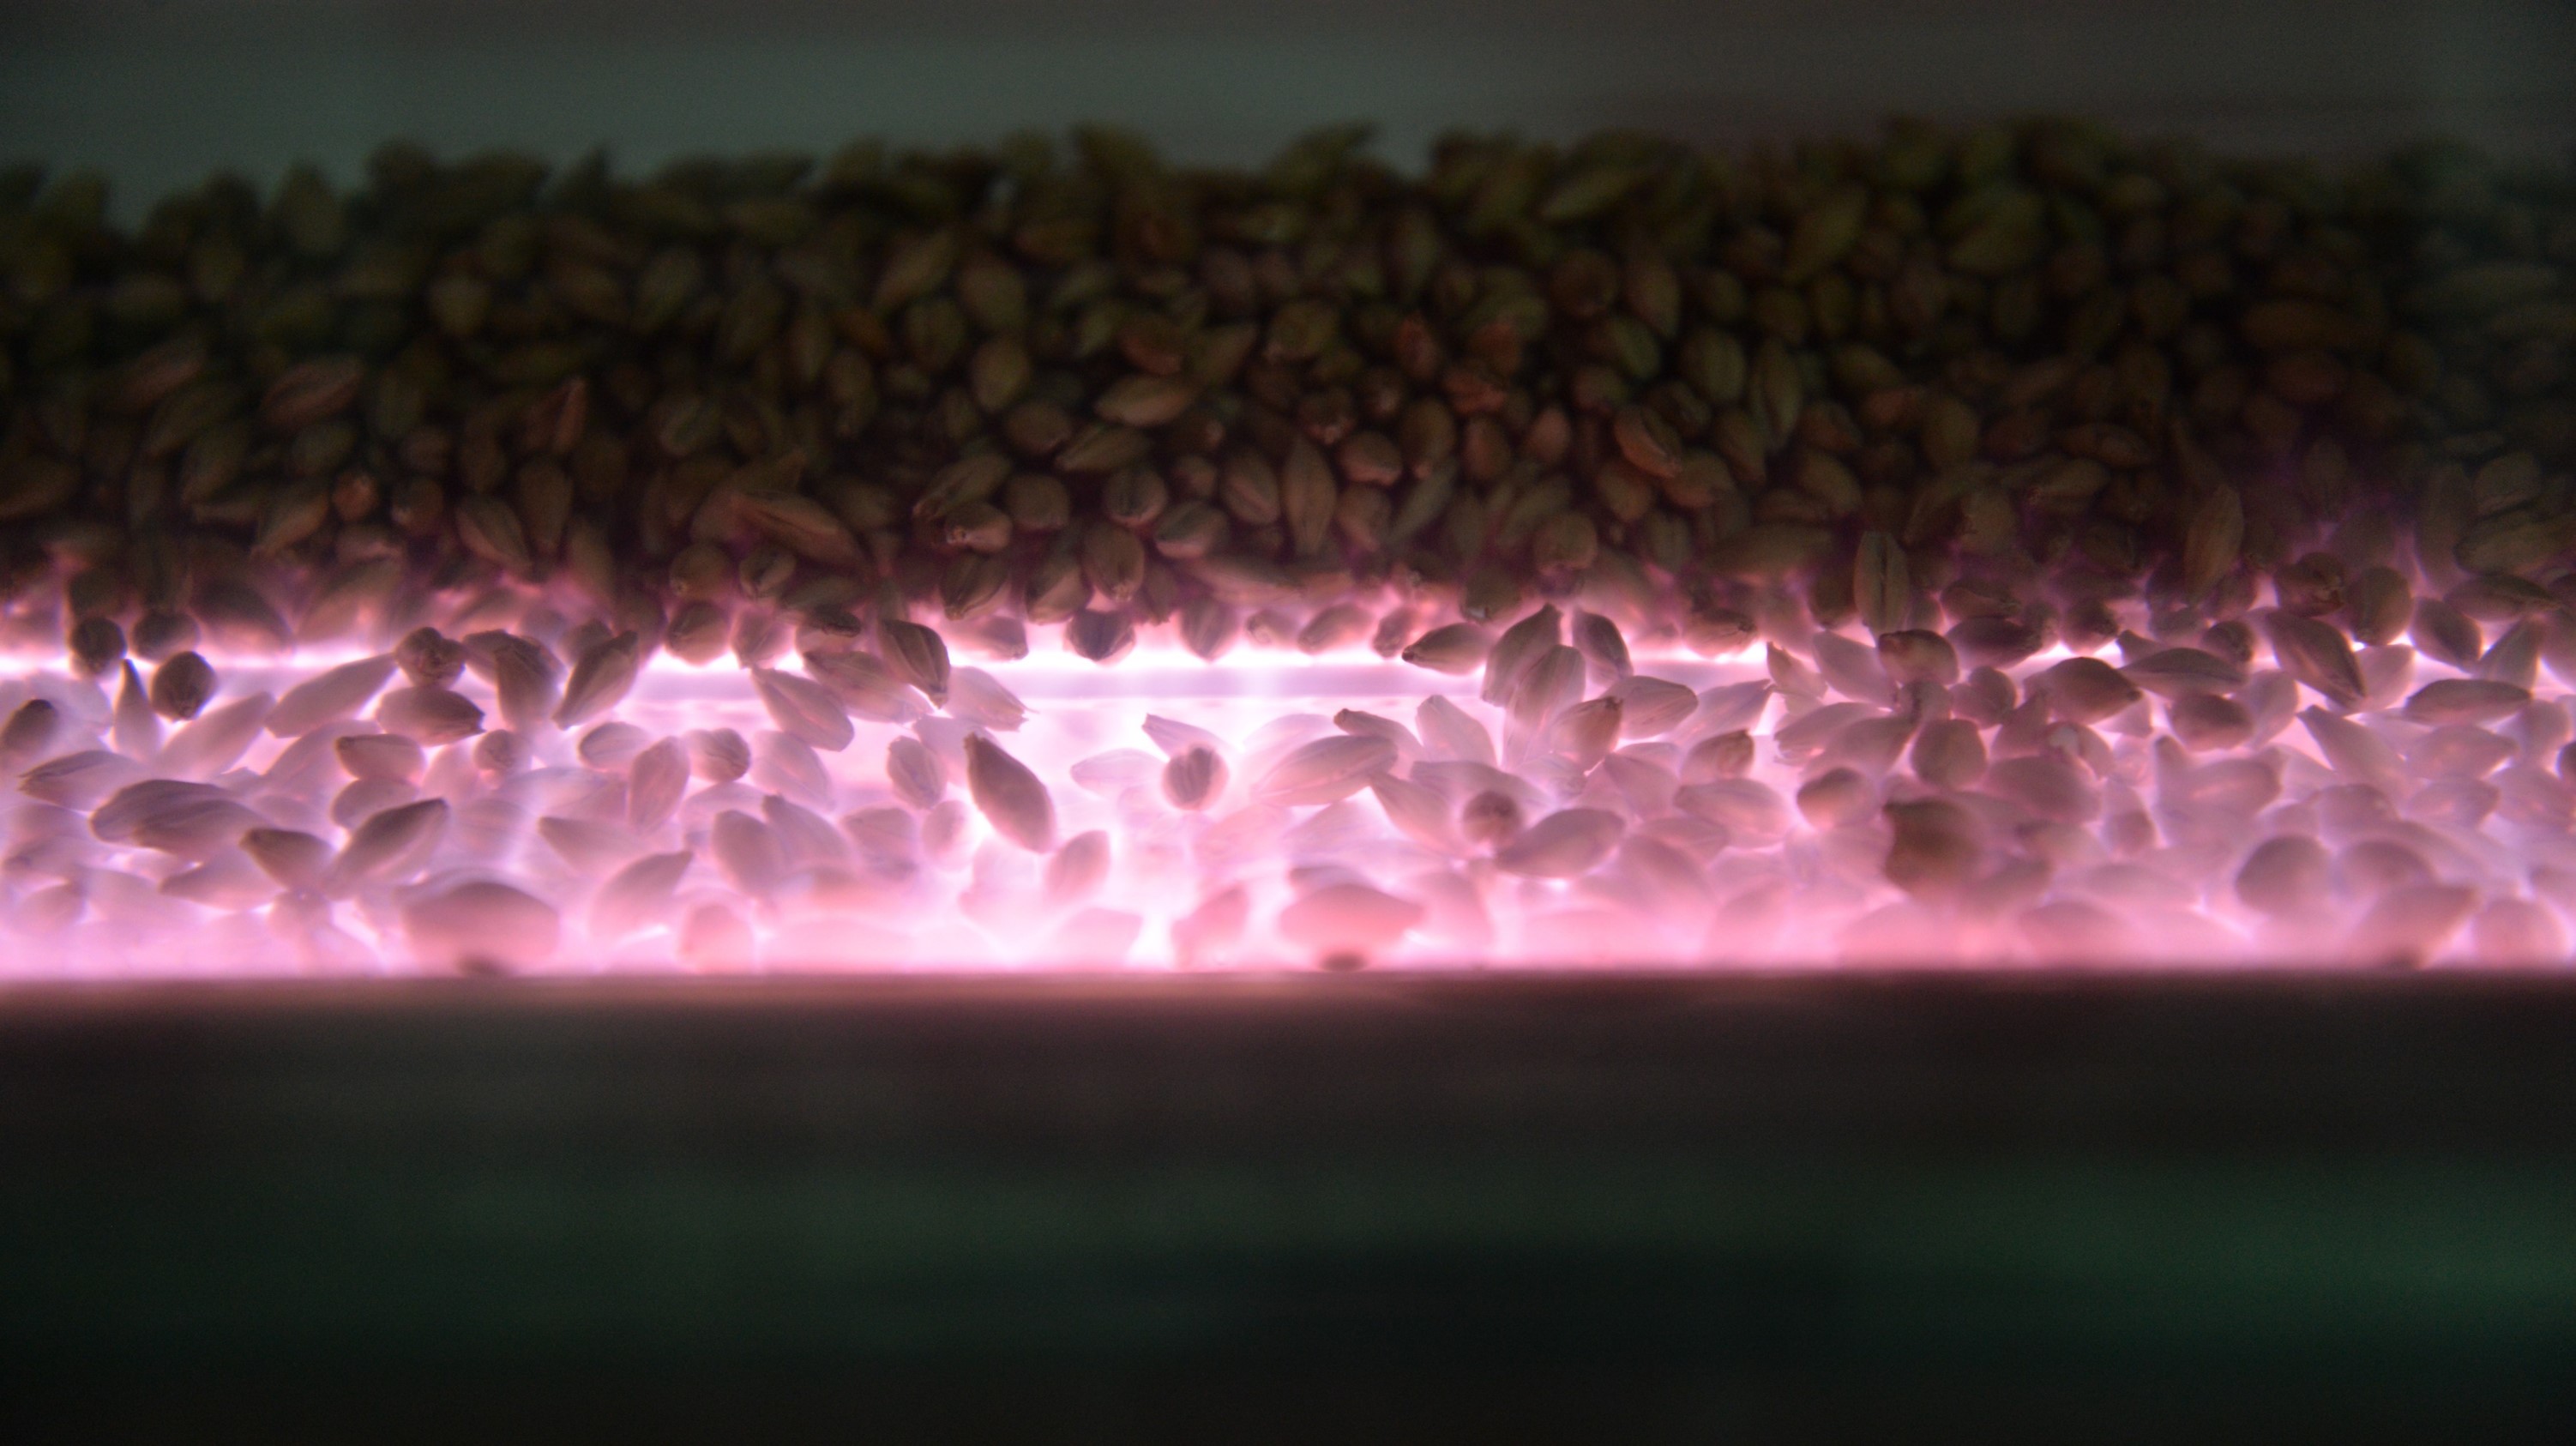 Cold plasma processes are also being developed for use with foods such as grains and seed